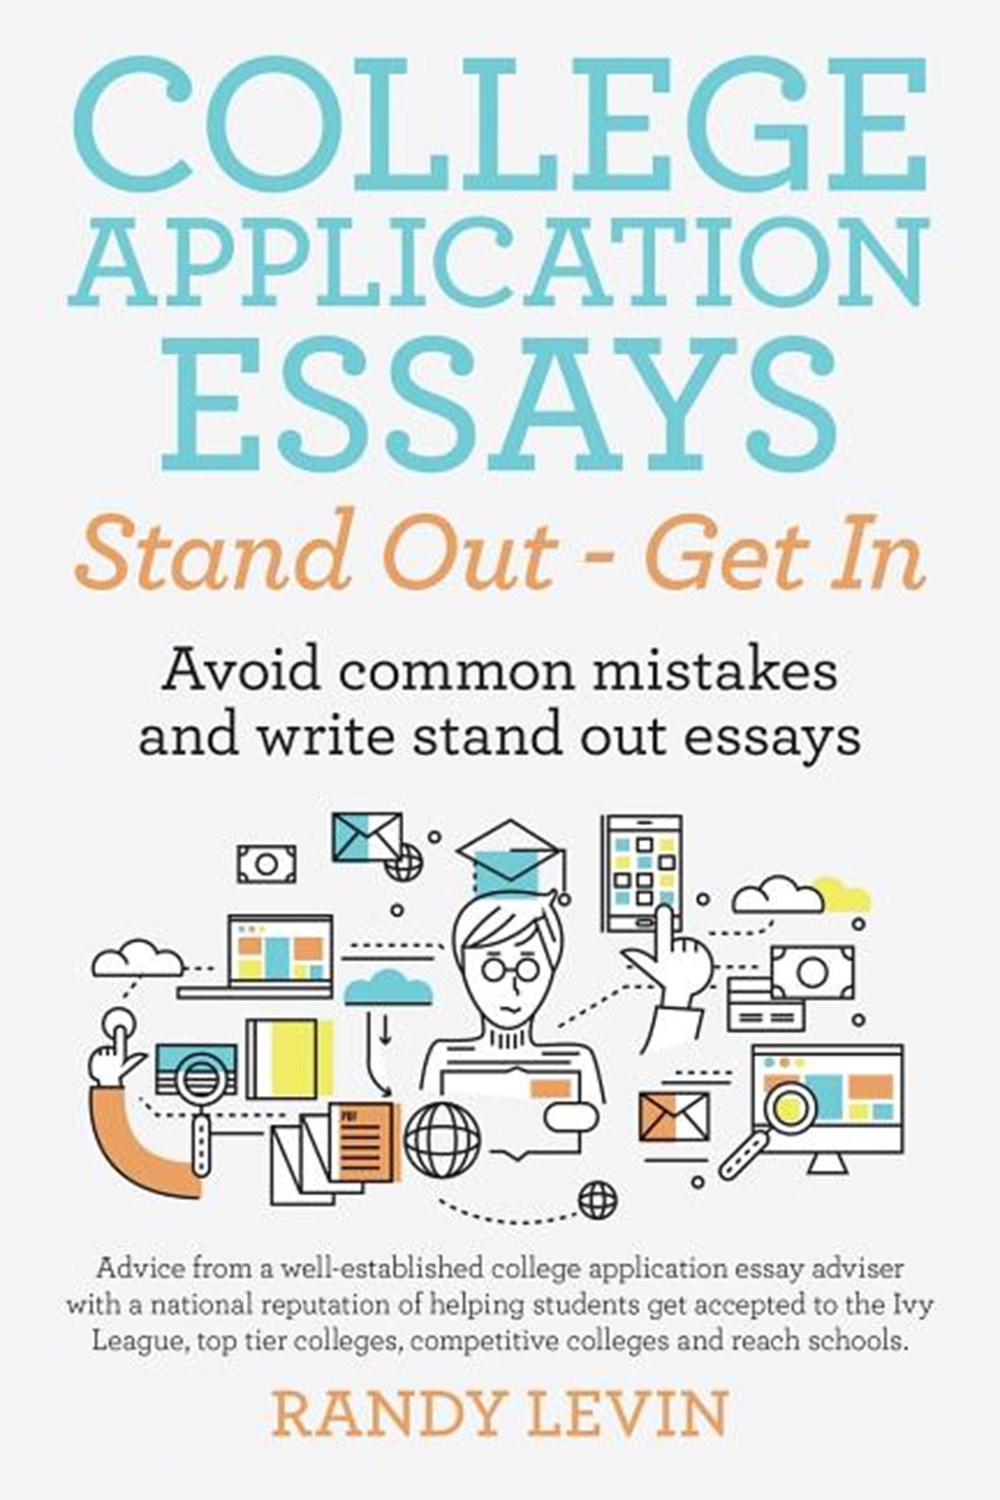 College application essay help online stands out